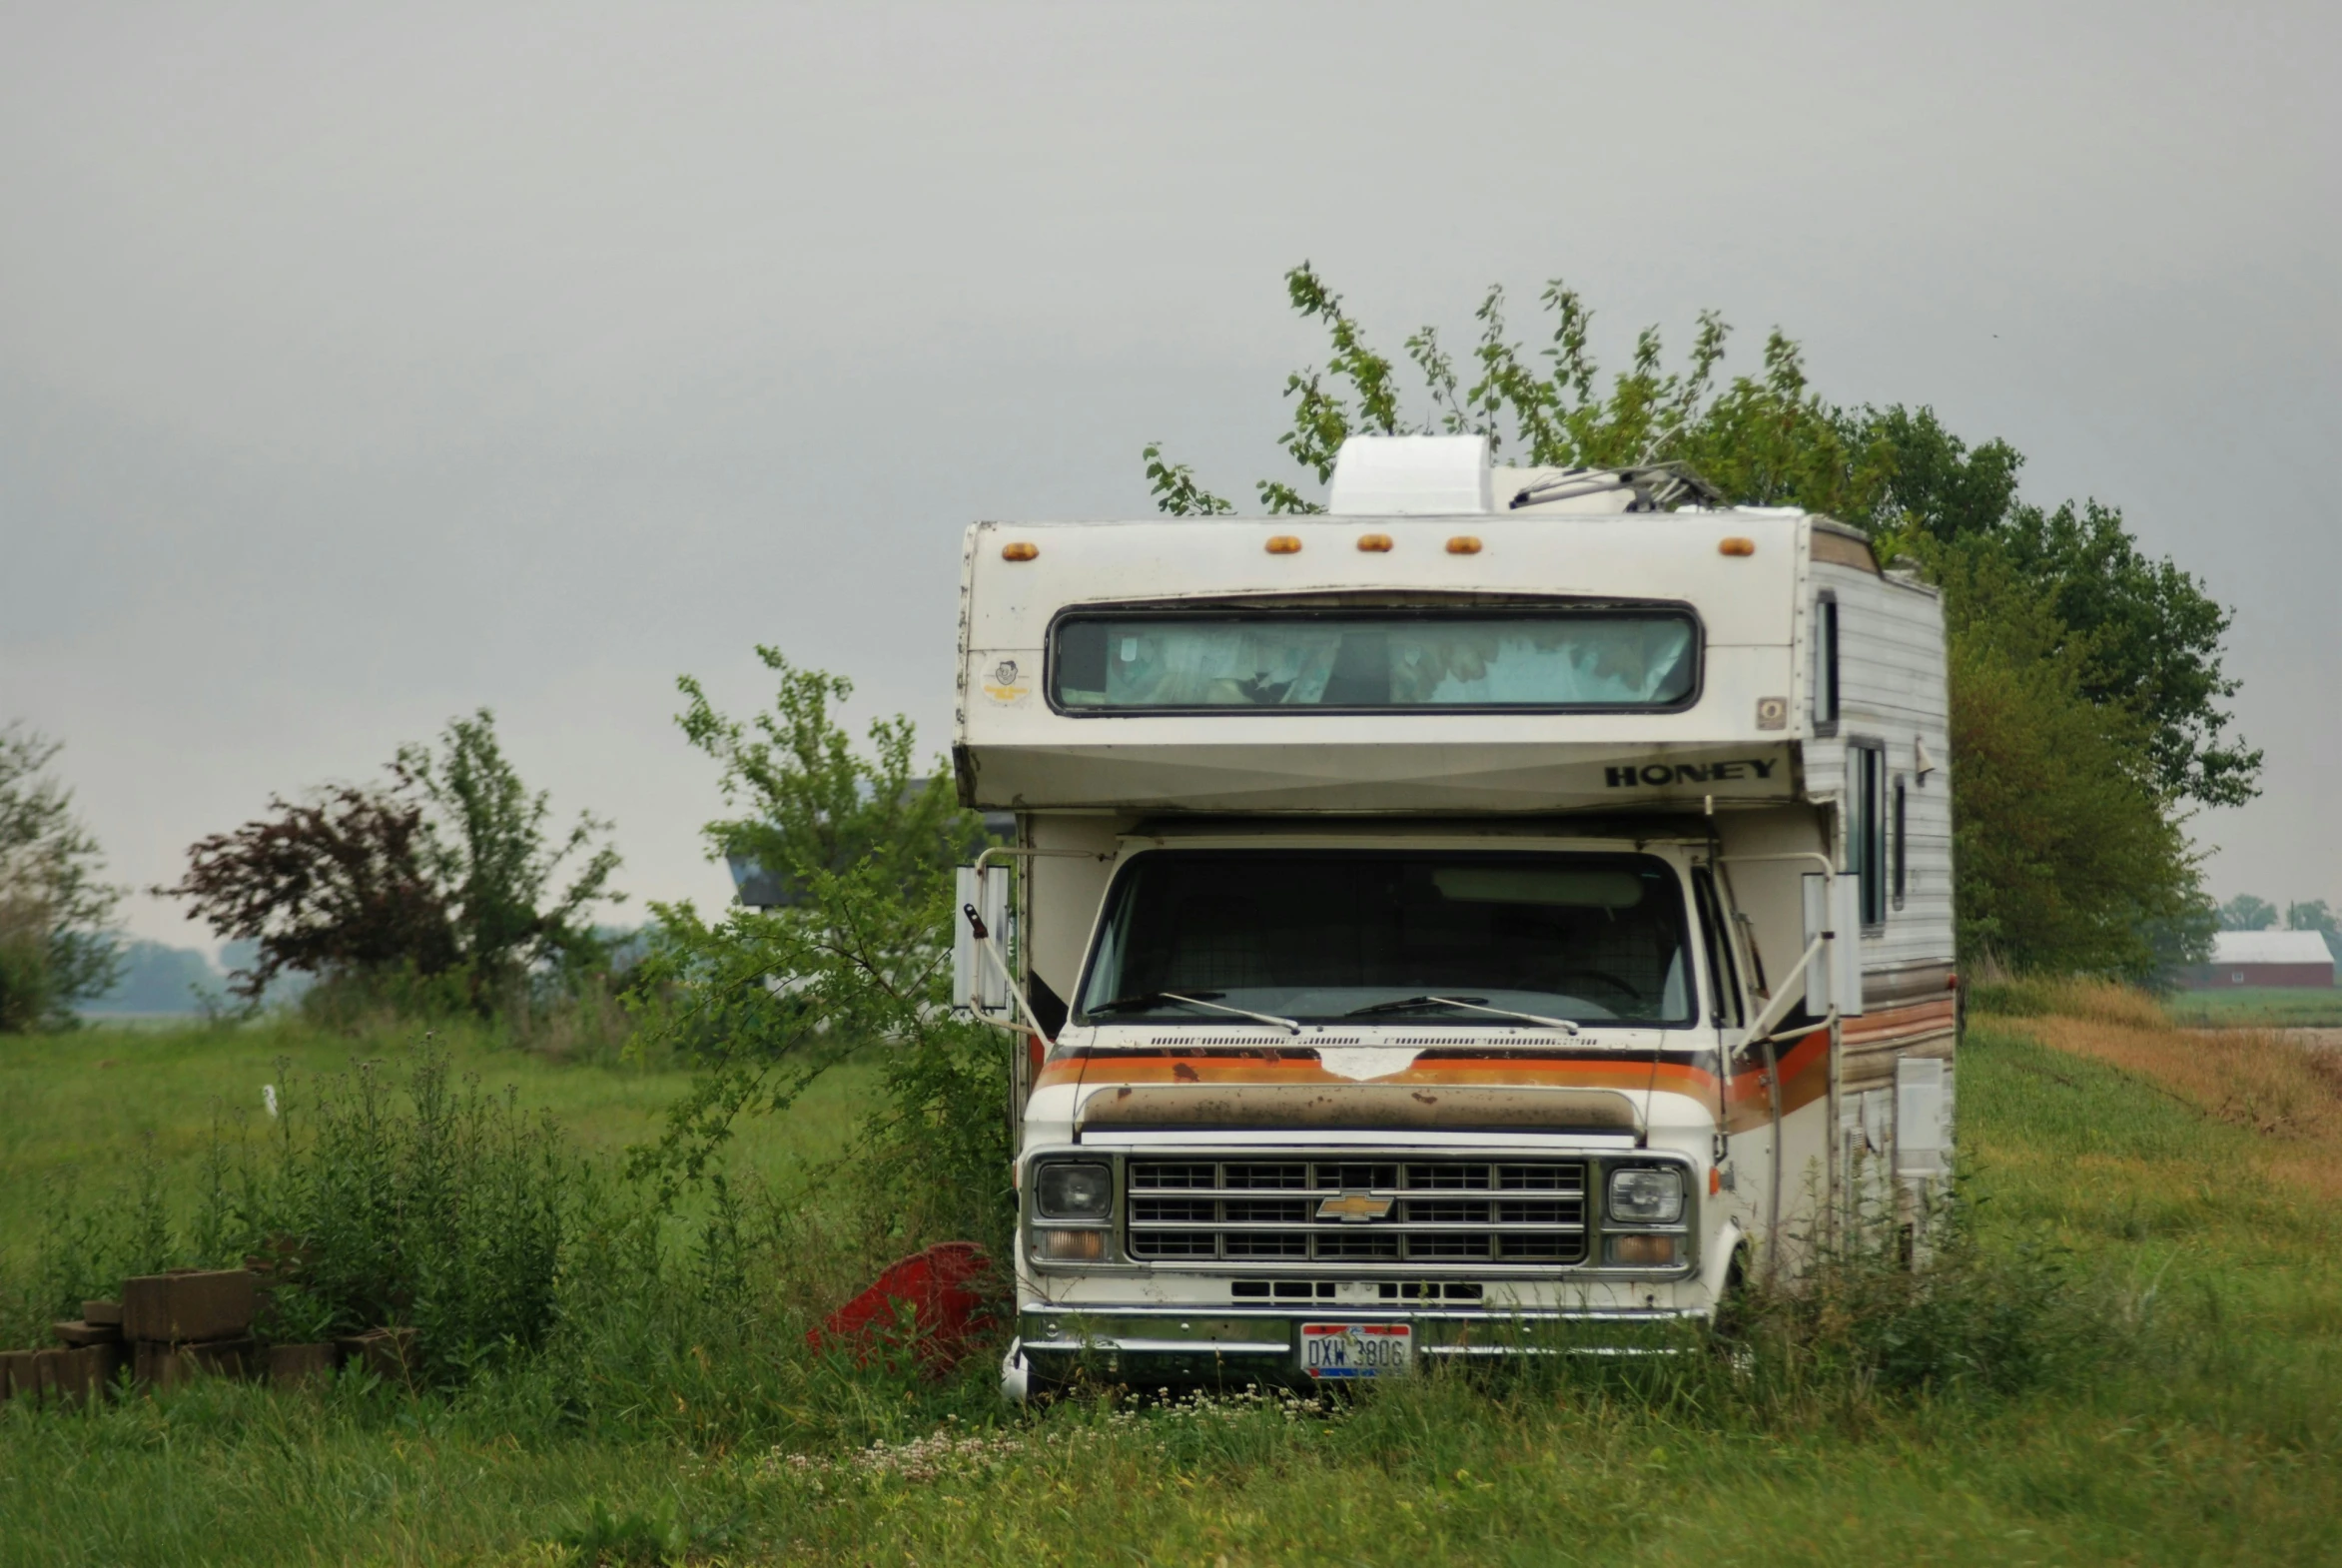 an old dump truck sits out on the grassy lot